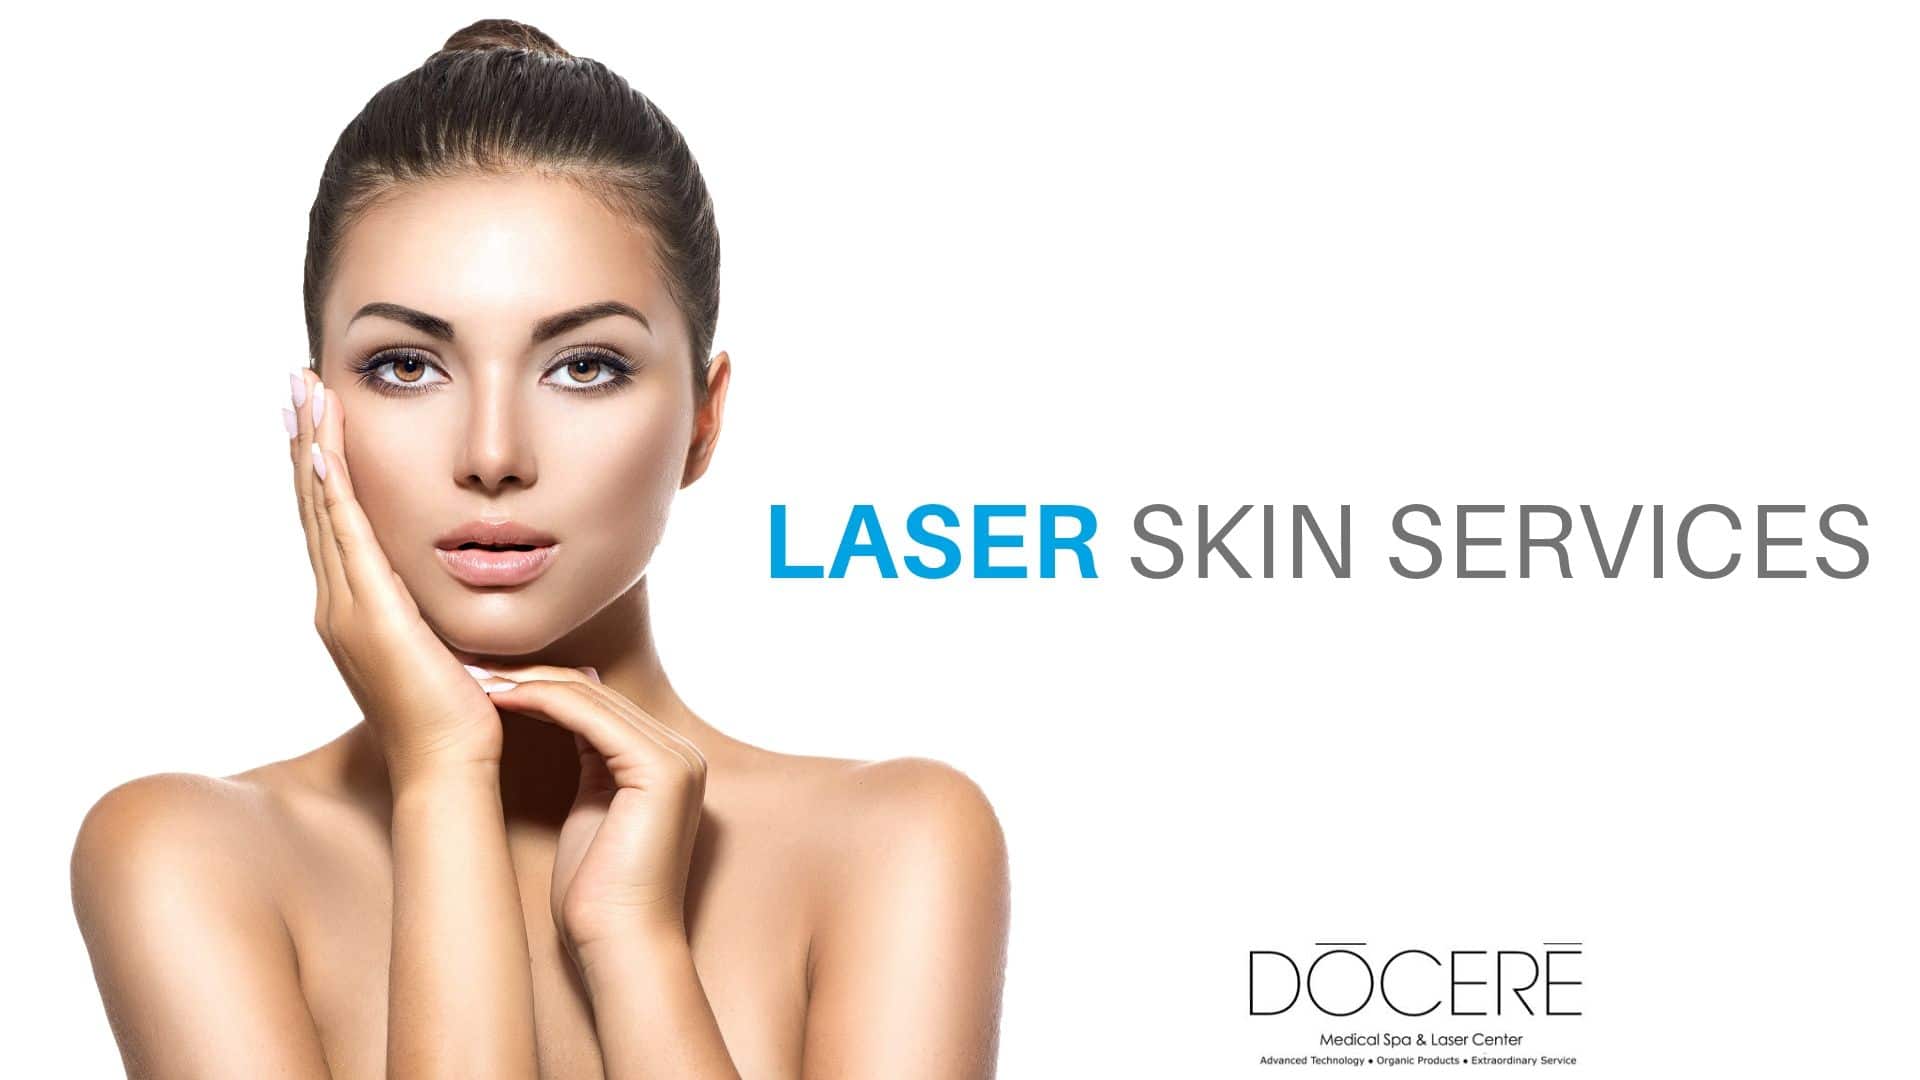 Woman touching her smooth and clear skin after laser skin services at Docere medspa.